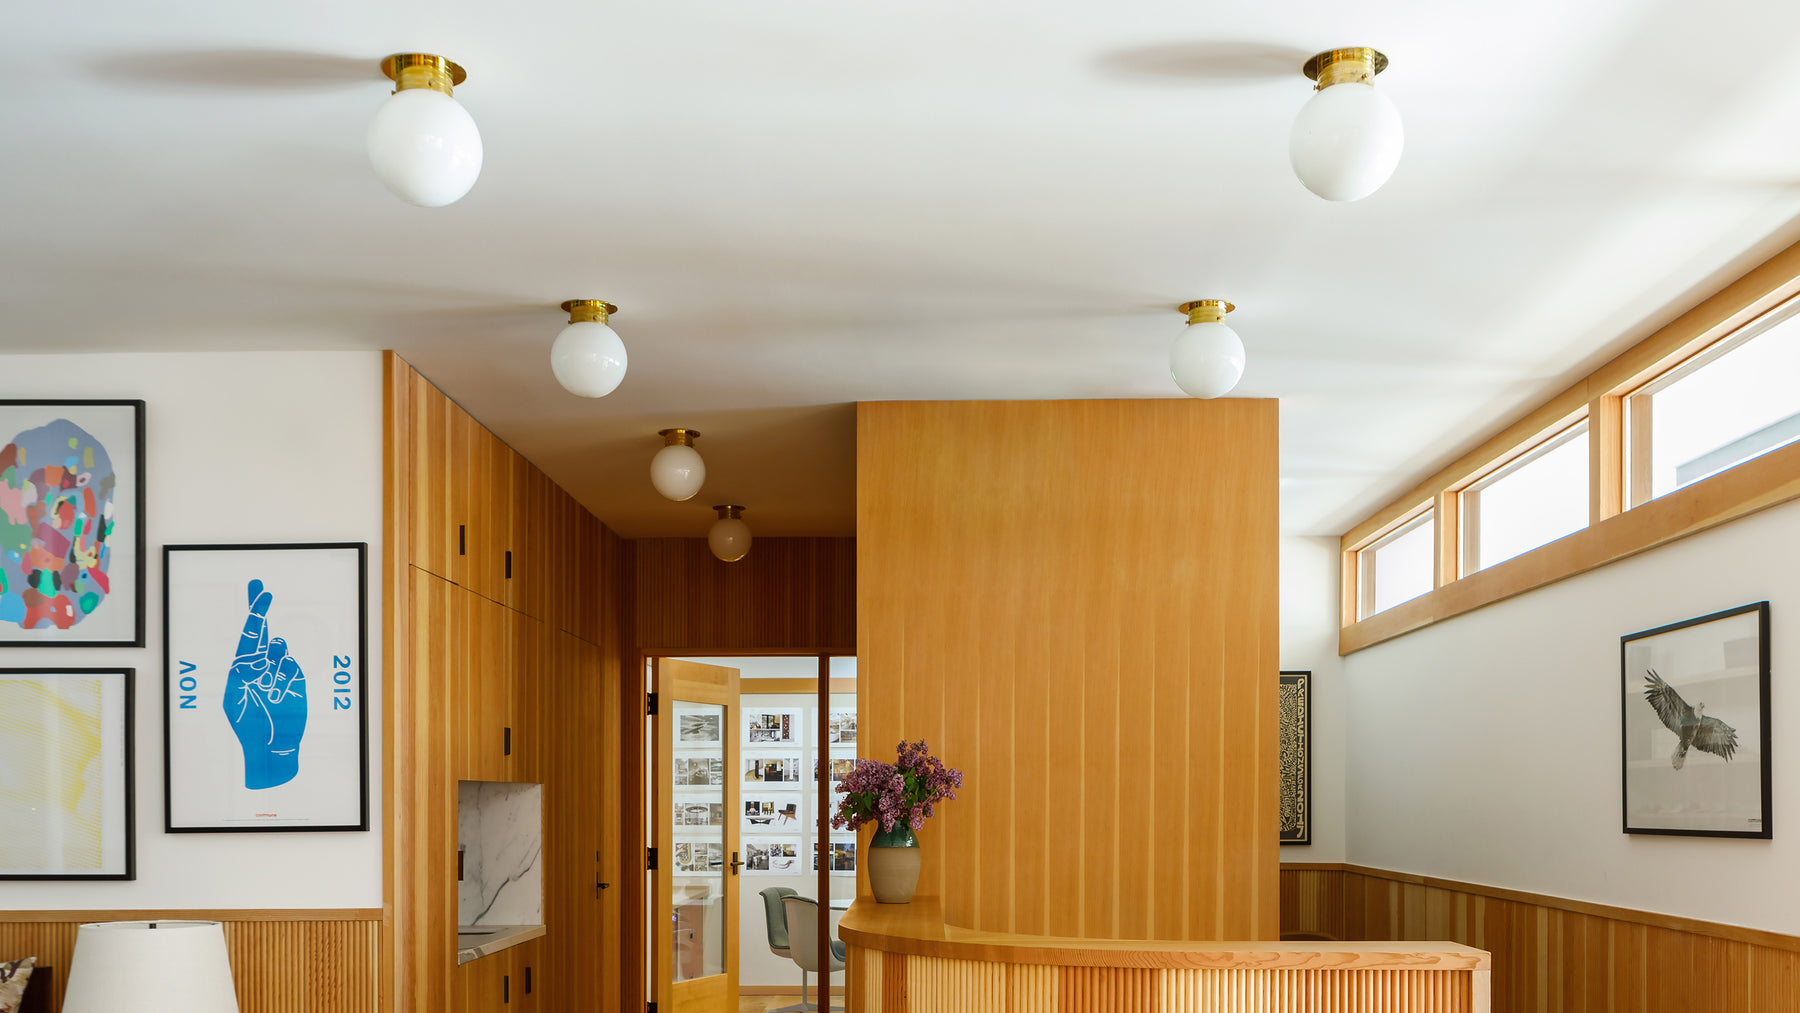 A series of Globe flush-mounted ceiling fixtures in the entry of Commune Design's LA offices, with wood paneling and artwork-lined white walls.